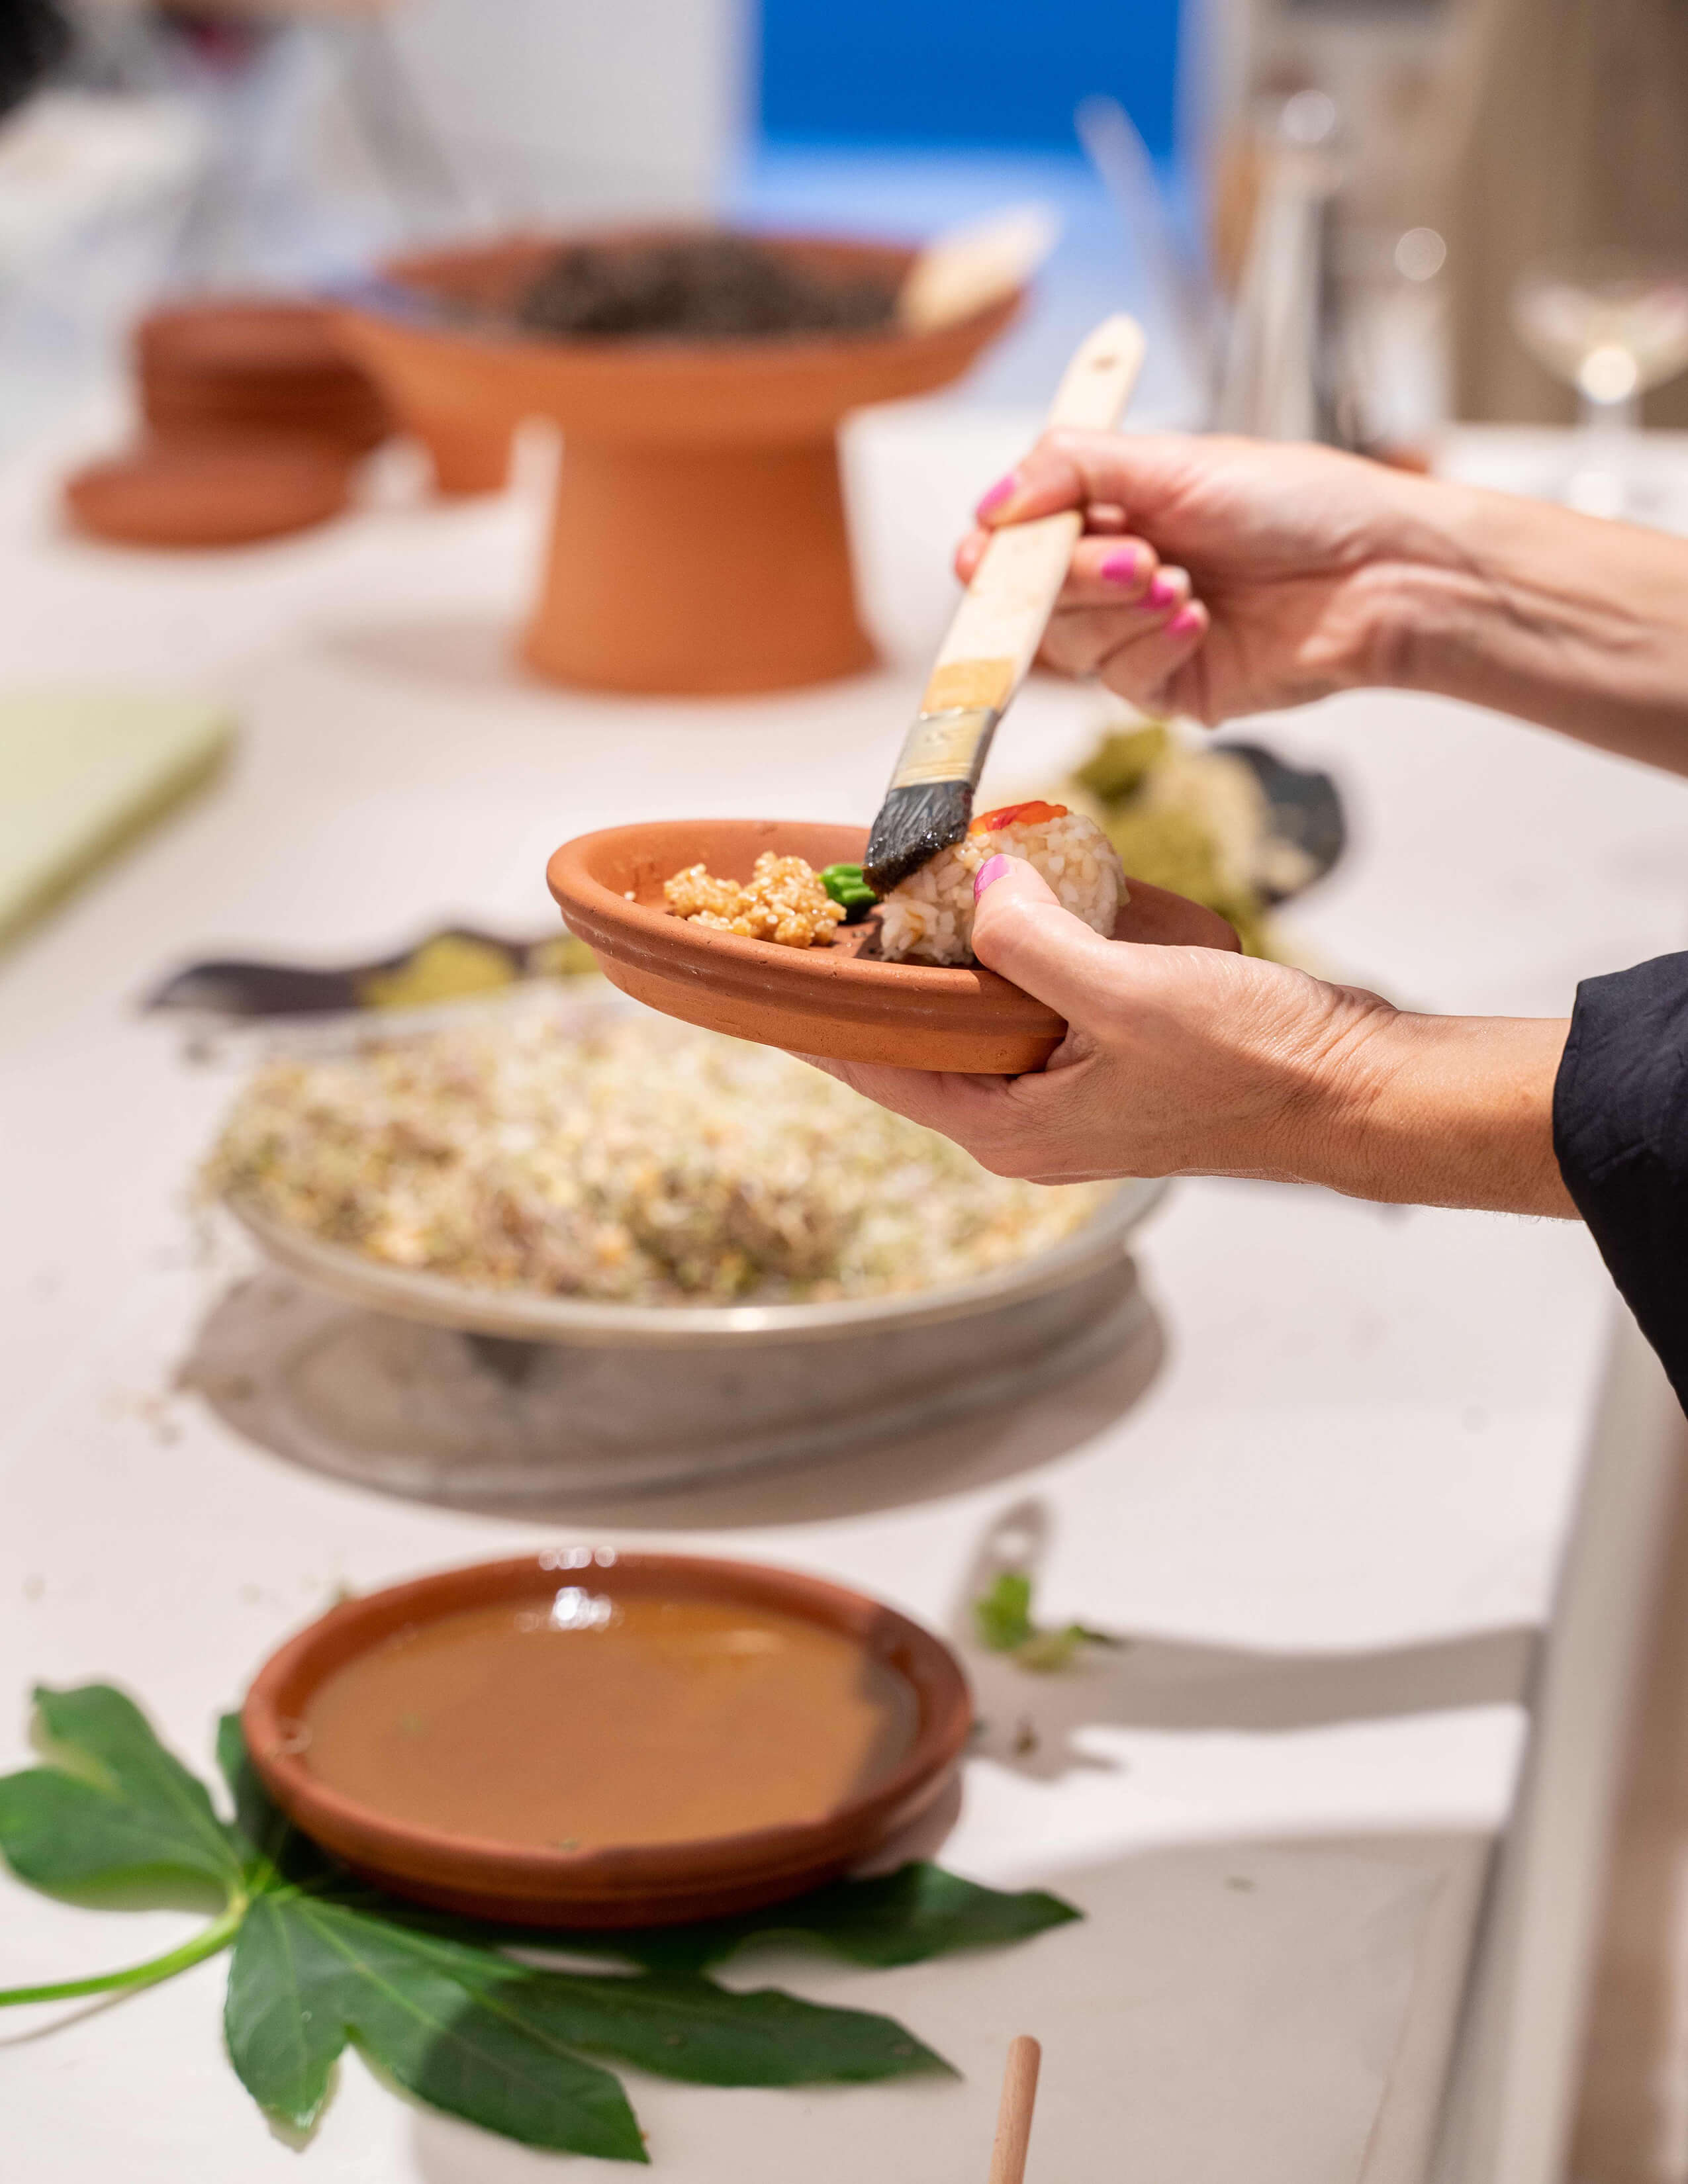 A pair of hands with pink nails, holding a plate of food while brushing sauce on it, and a big piece of leaf is underneath a plate.